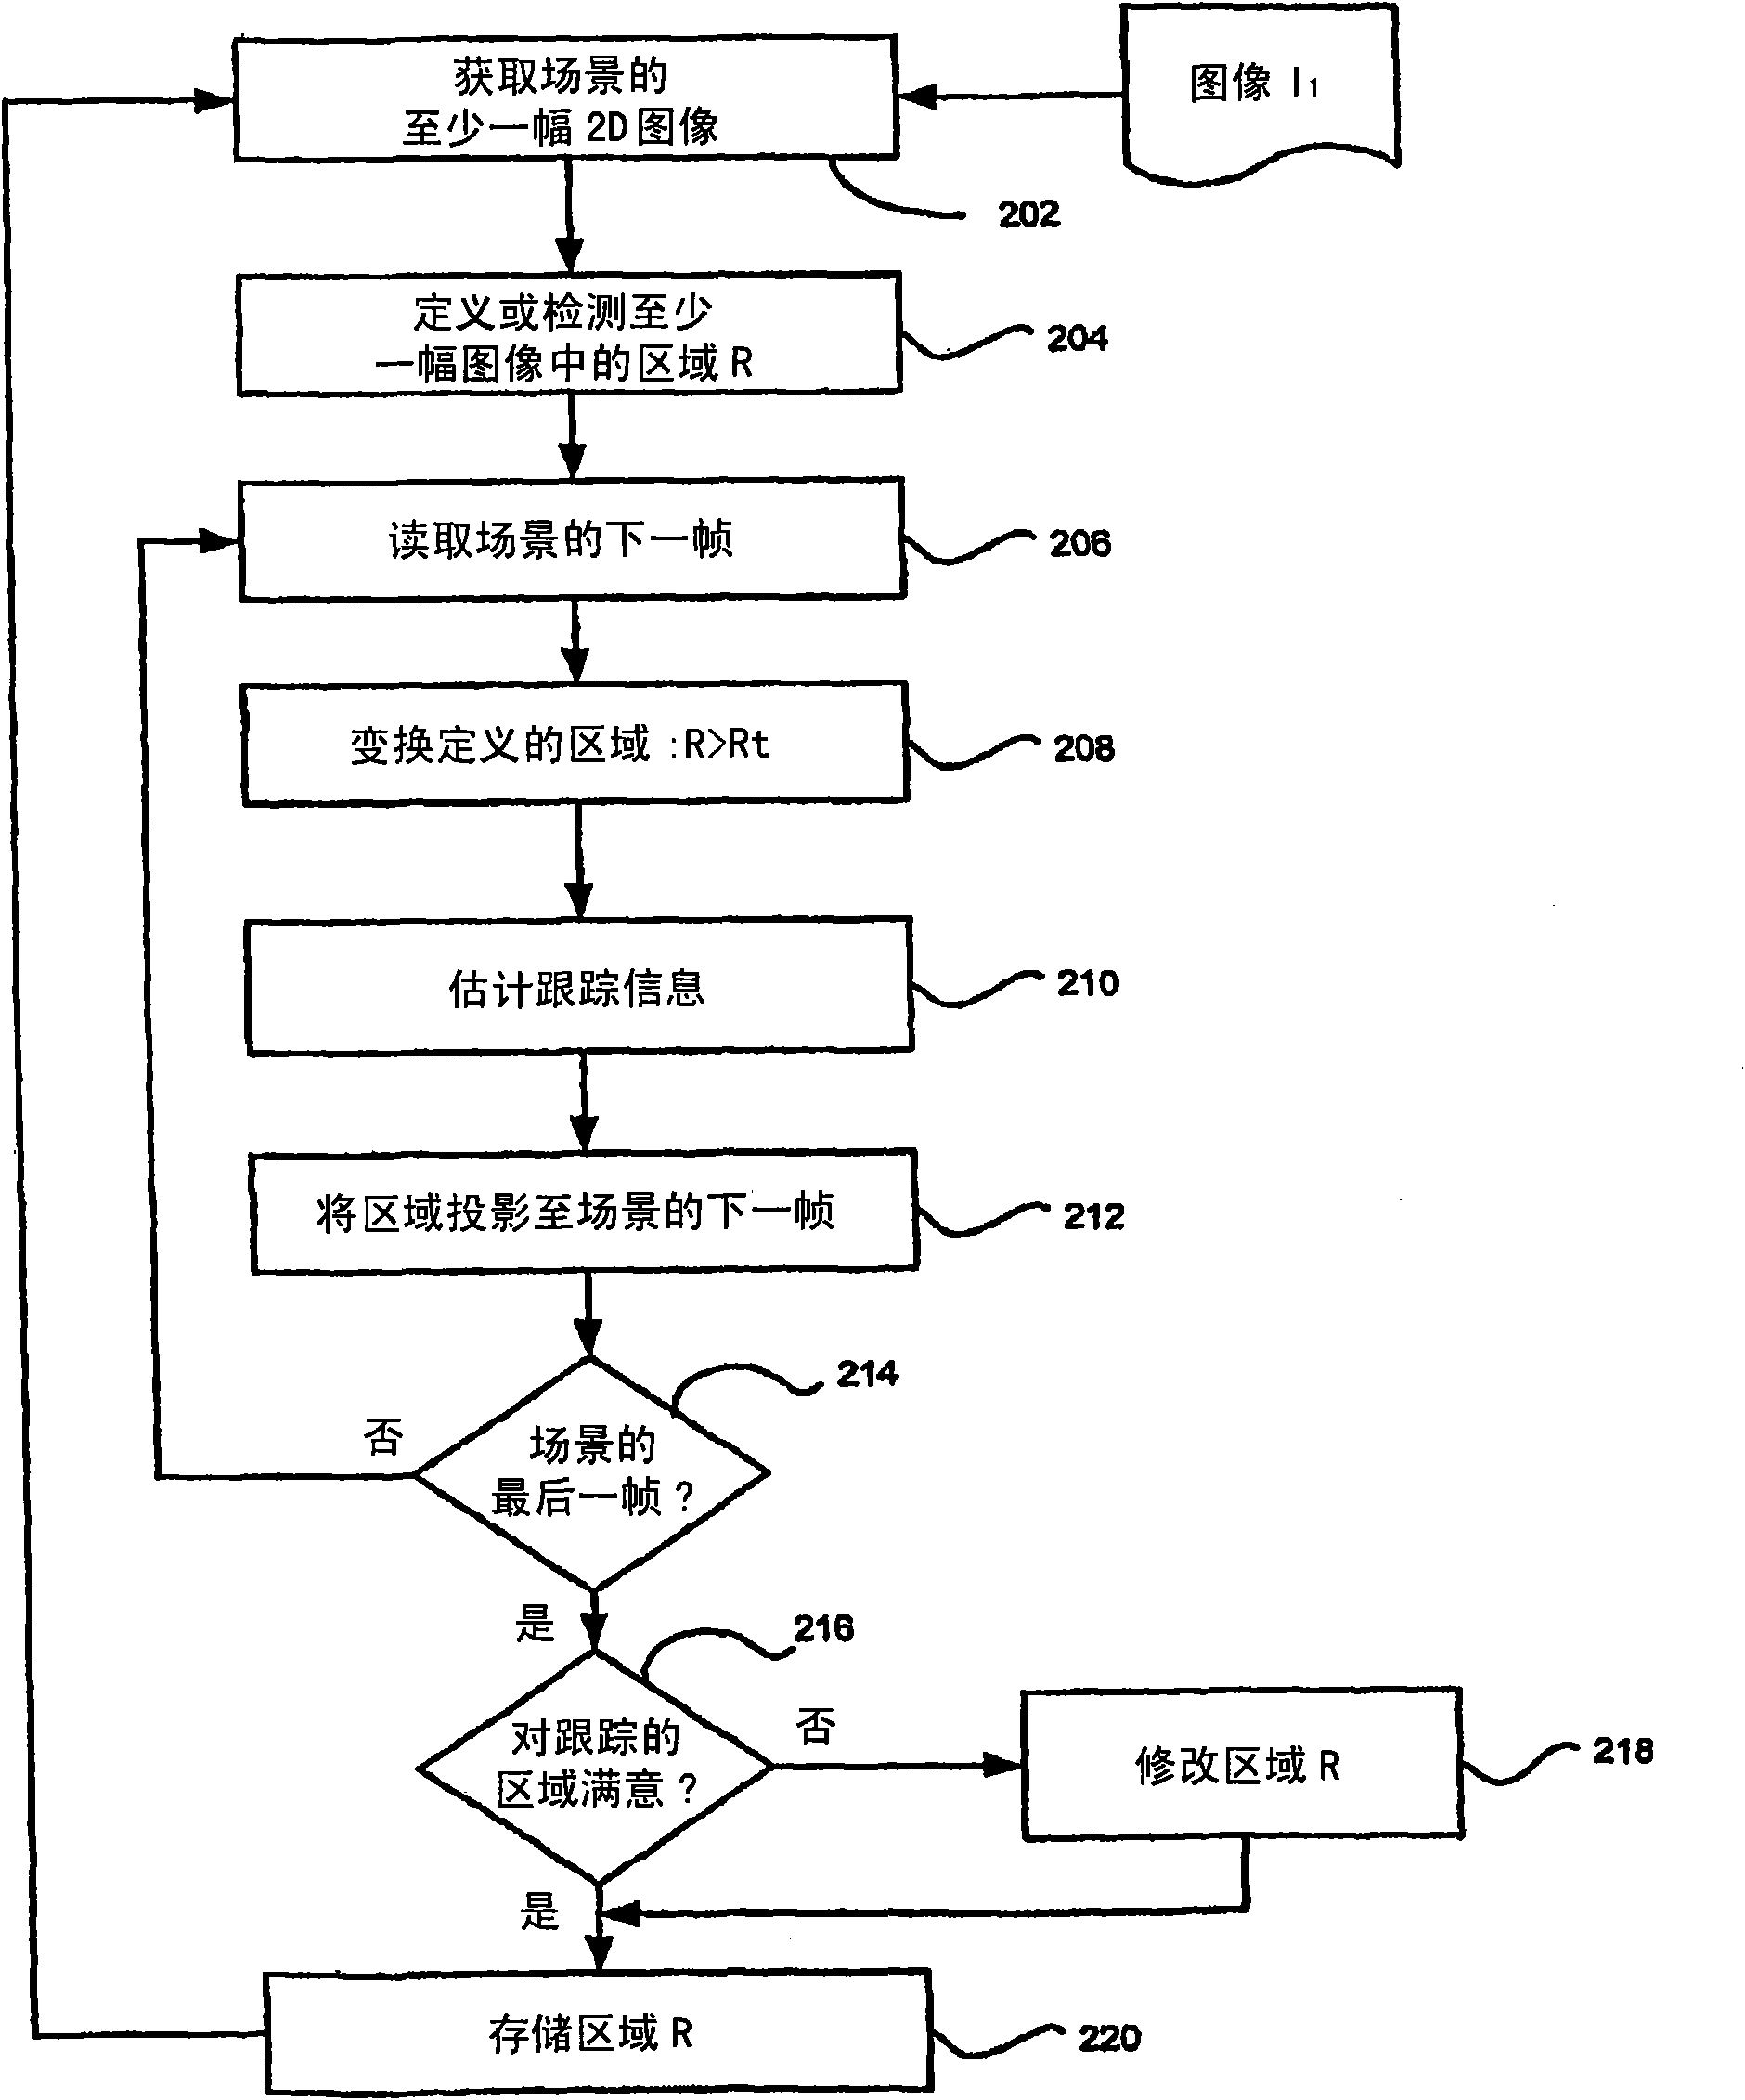 Apparatus and method for reducing artifacts in images